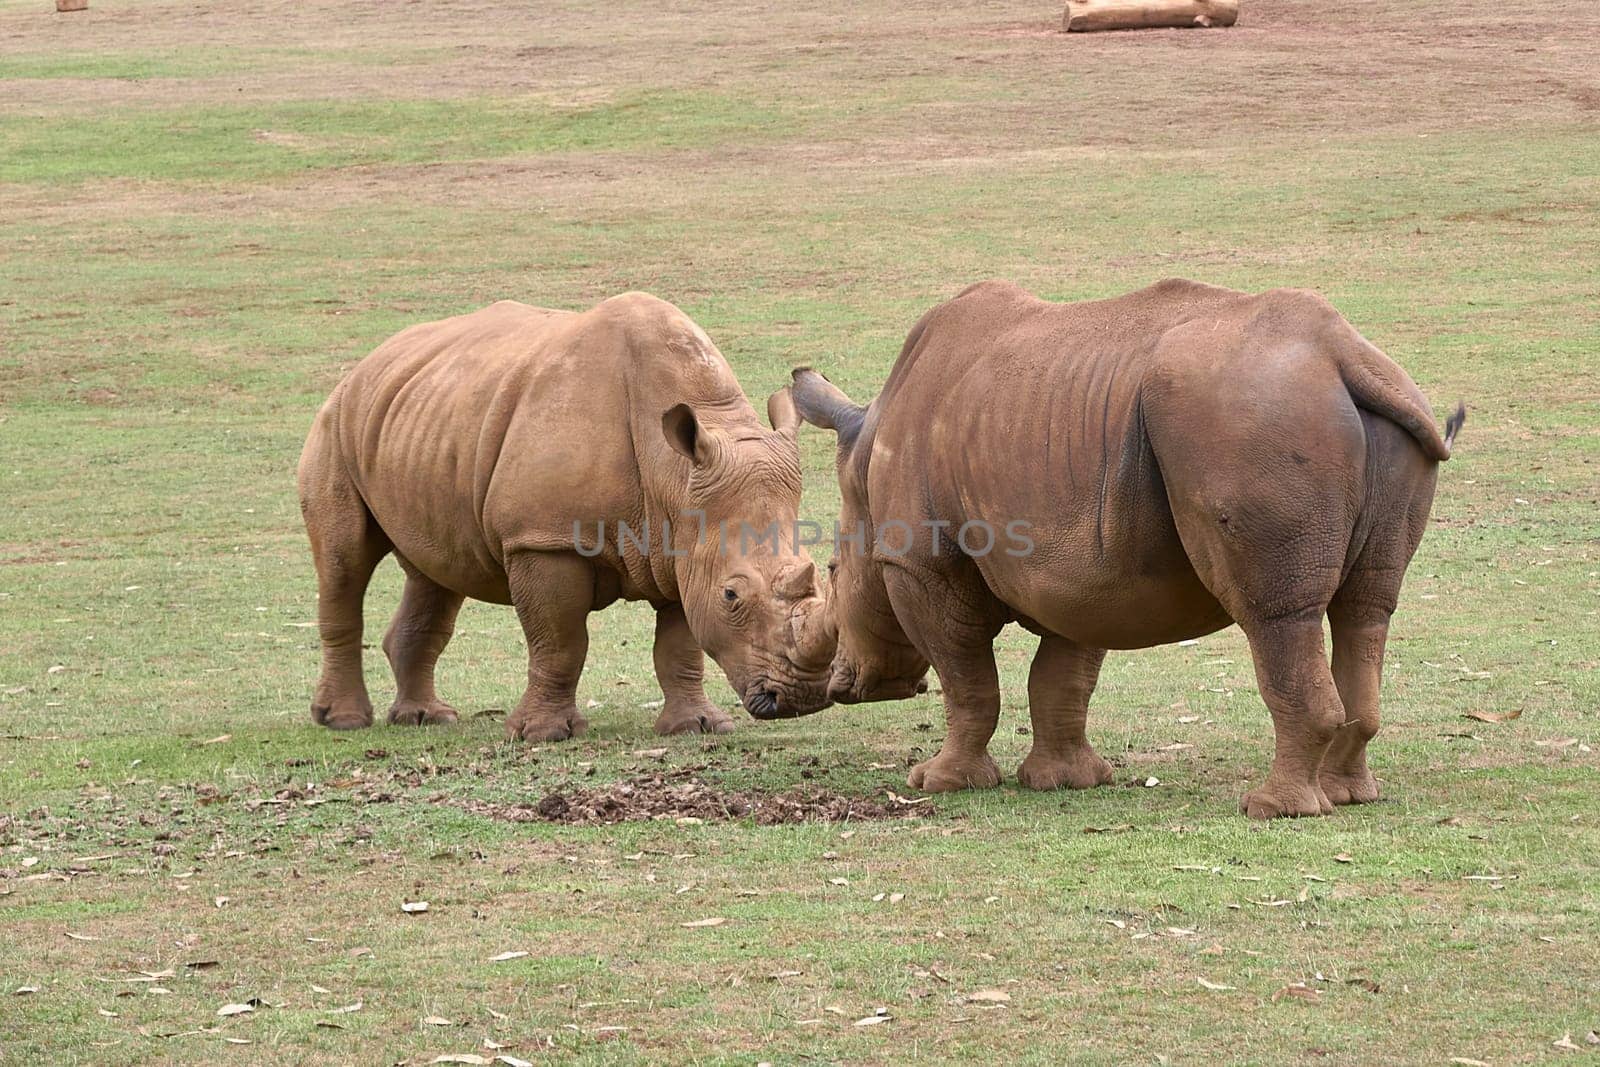 Two rhinoceroses facing each other head to head. Grass, horn detail, head, rage, challenge, power strength